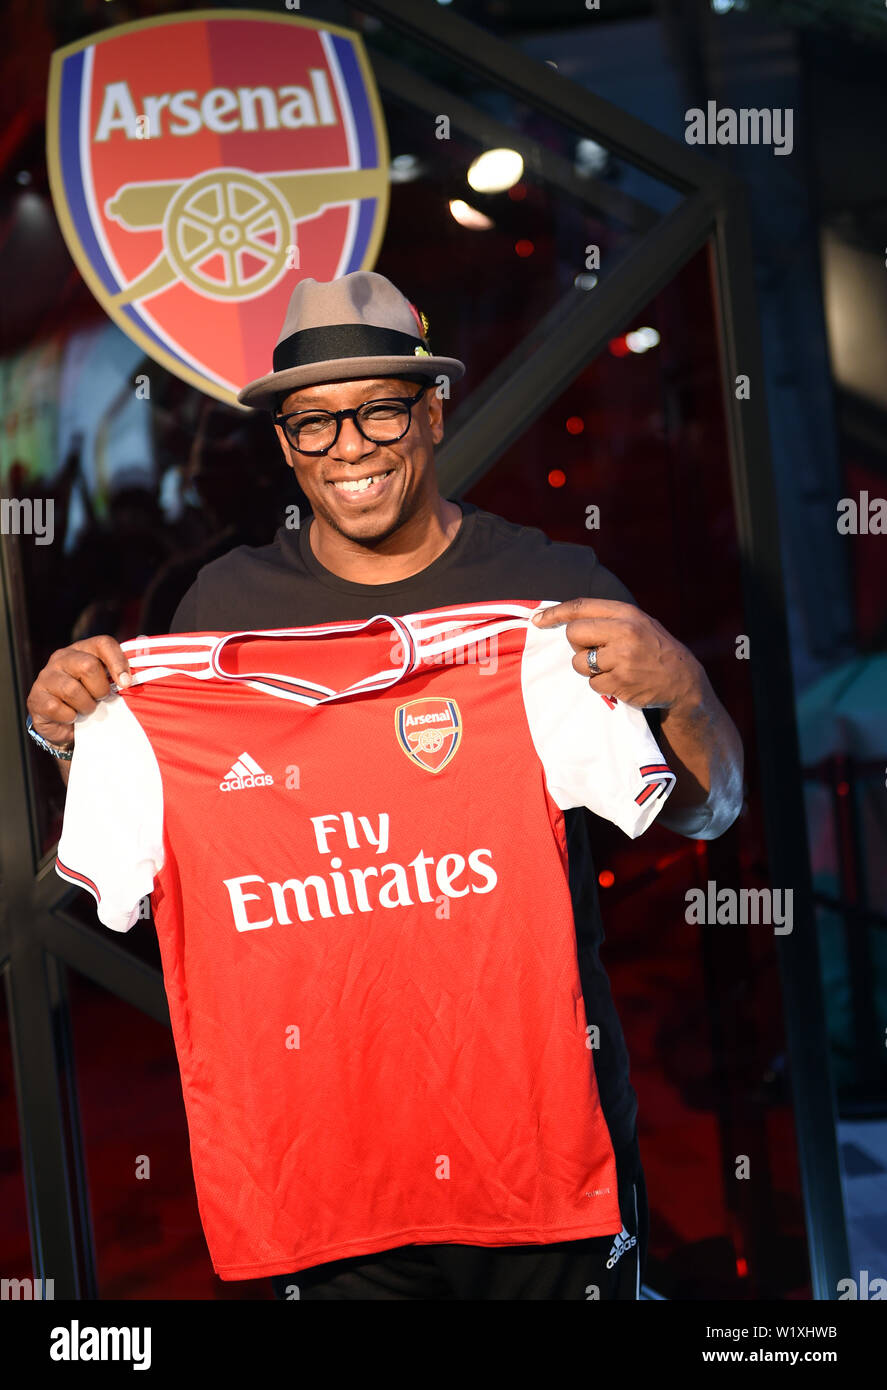 Former English football player Ian Wright attends a promotional event for  new team jersey of Arsenal F.C. of English football league system at a  sportswear store of Adidas in Hong Kong, China,